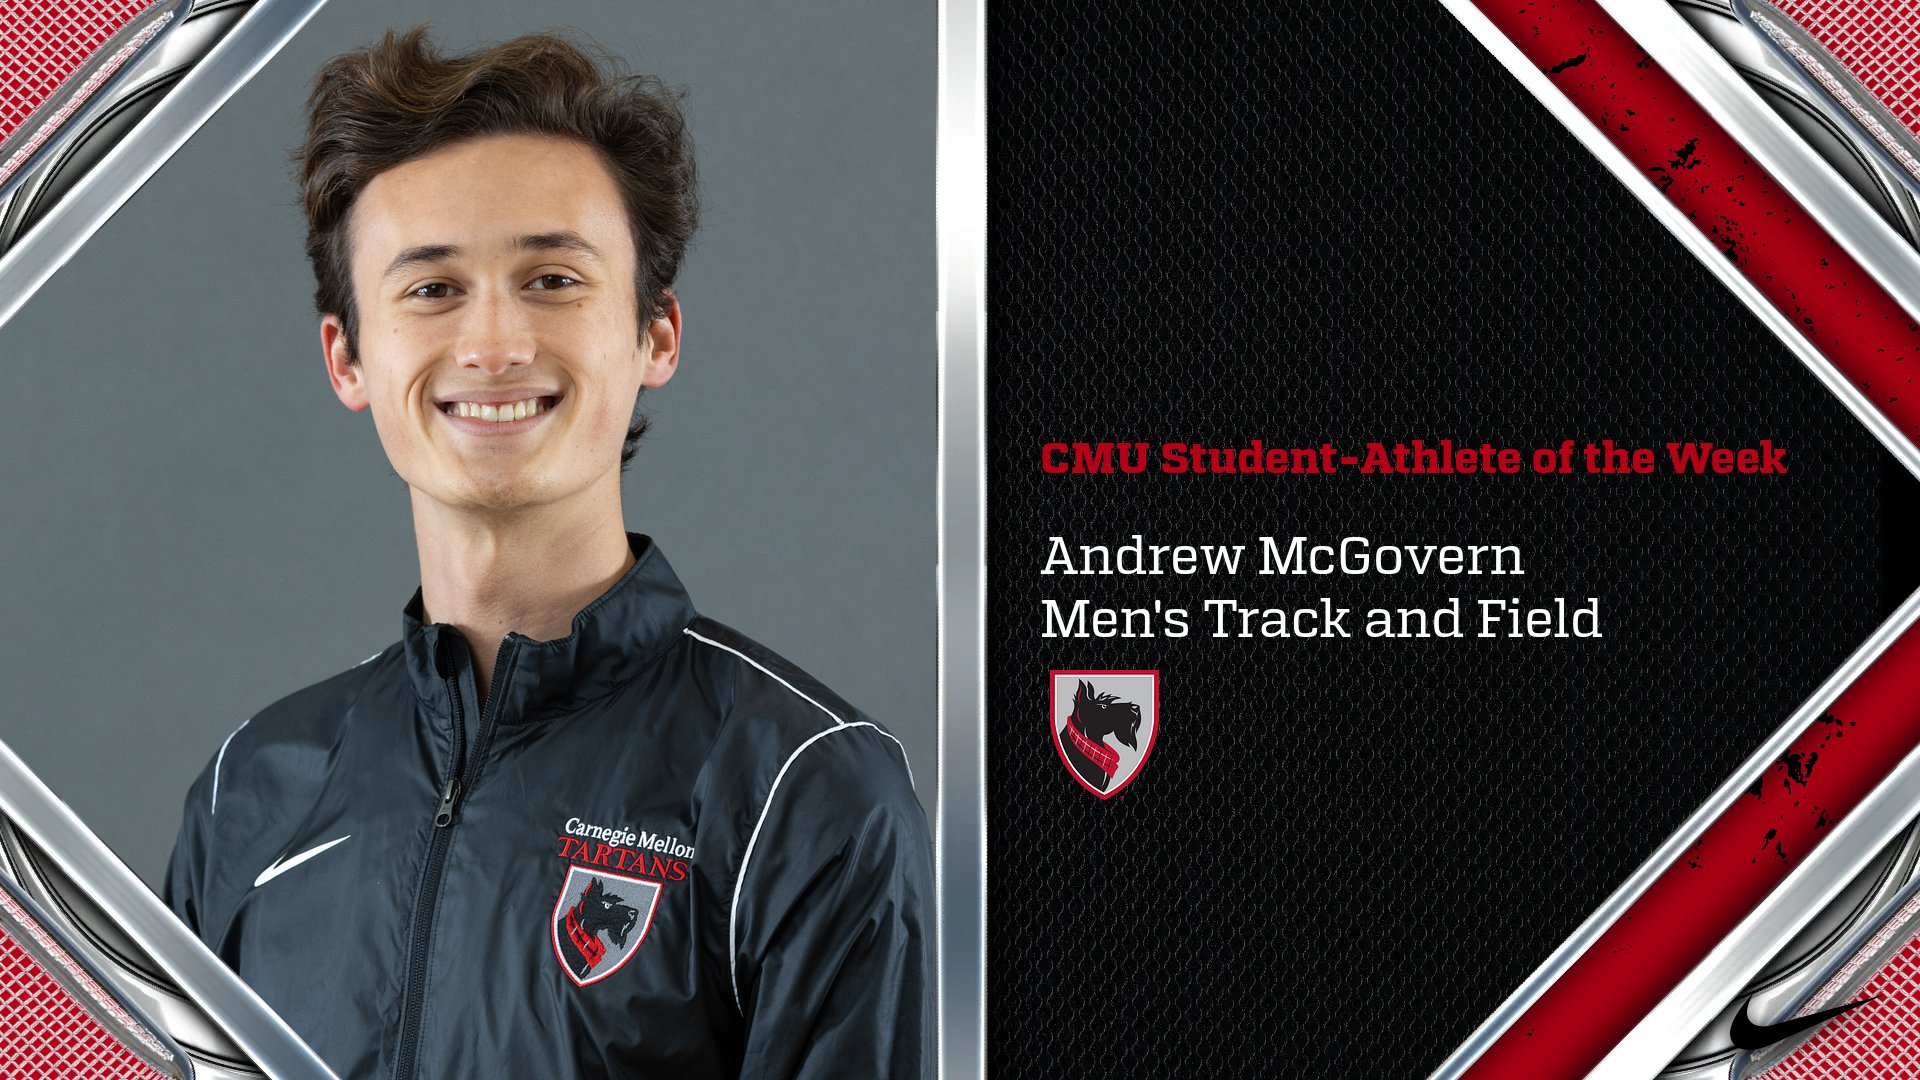 CMU Student-Athlete of the Week